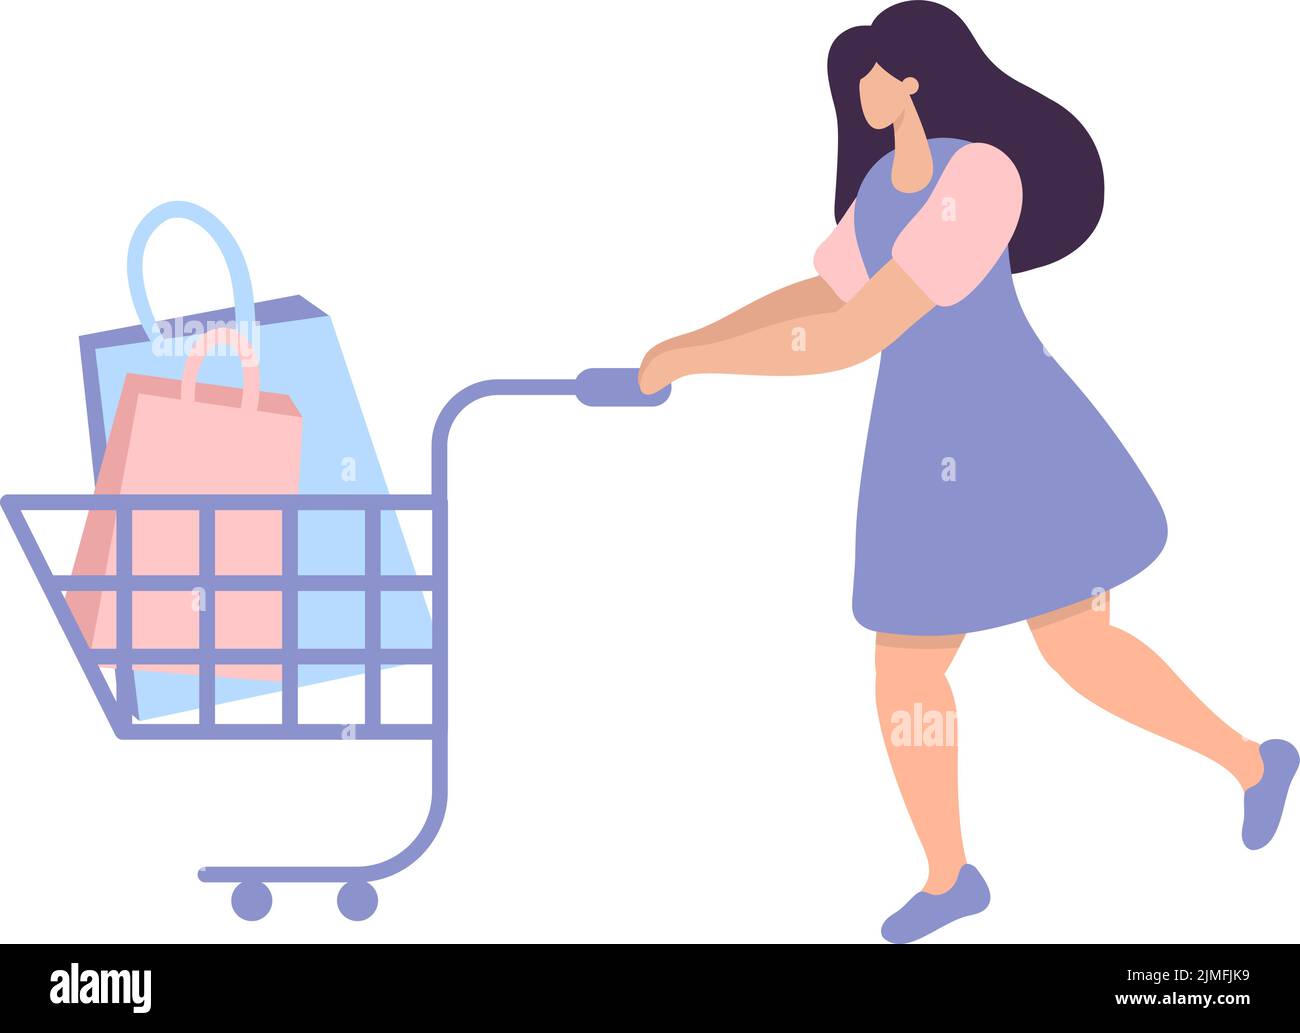 Young woman walking with colorful bags shopping in cart. Creative marketing shopping concept of customer earning reward or prize from buying products Stock Vector